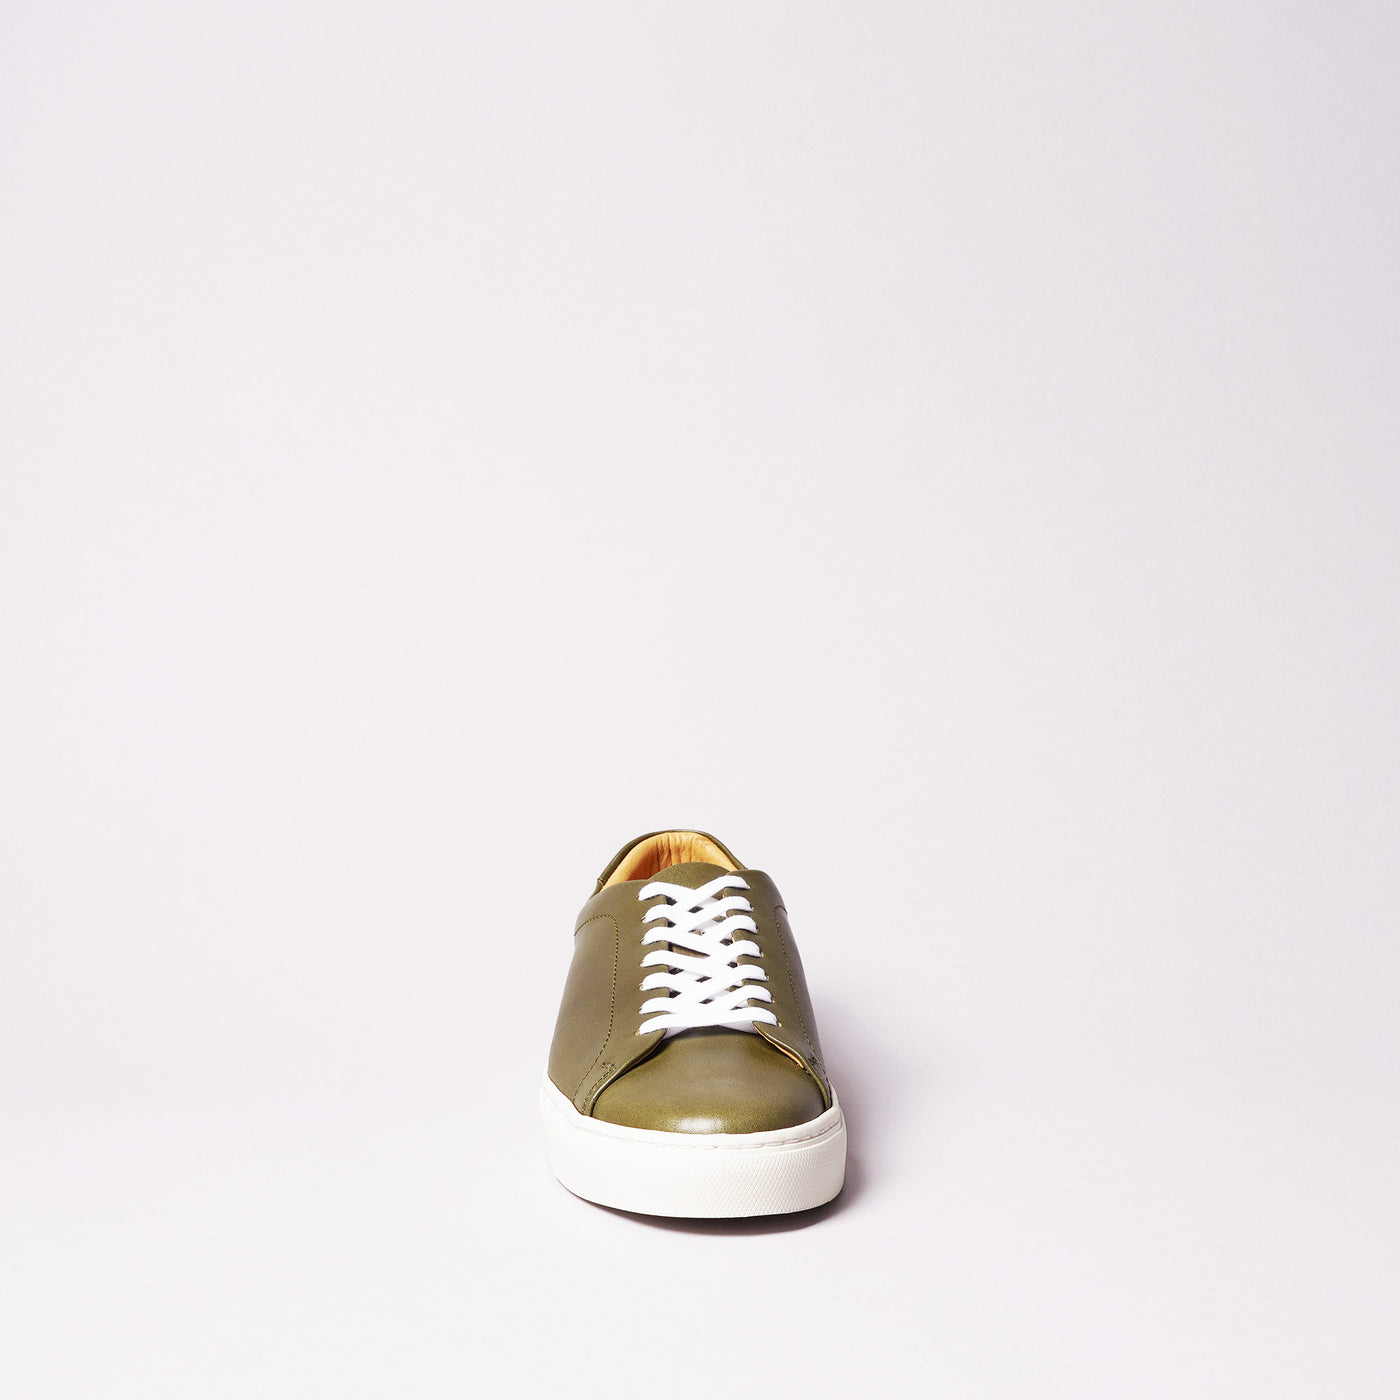 <TOSS> Chester Chester lace-up leather sneakers, Tanned Tochigi leather /  brown